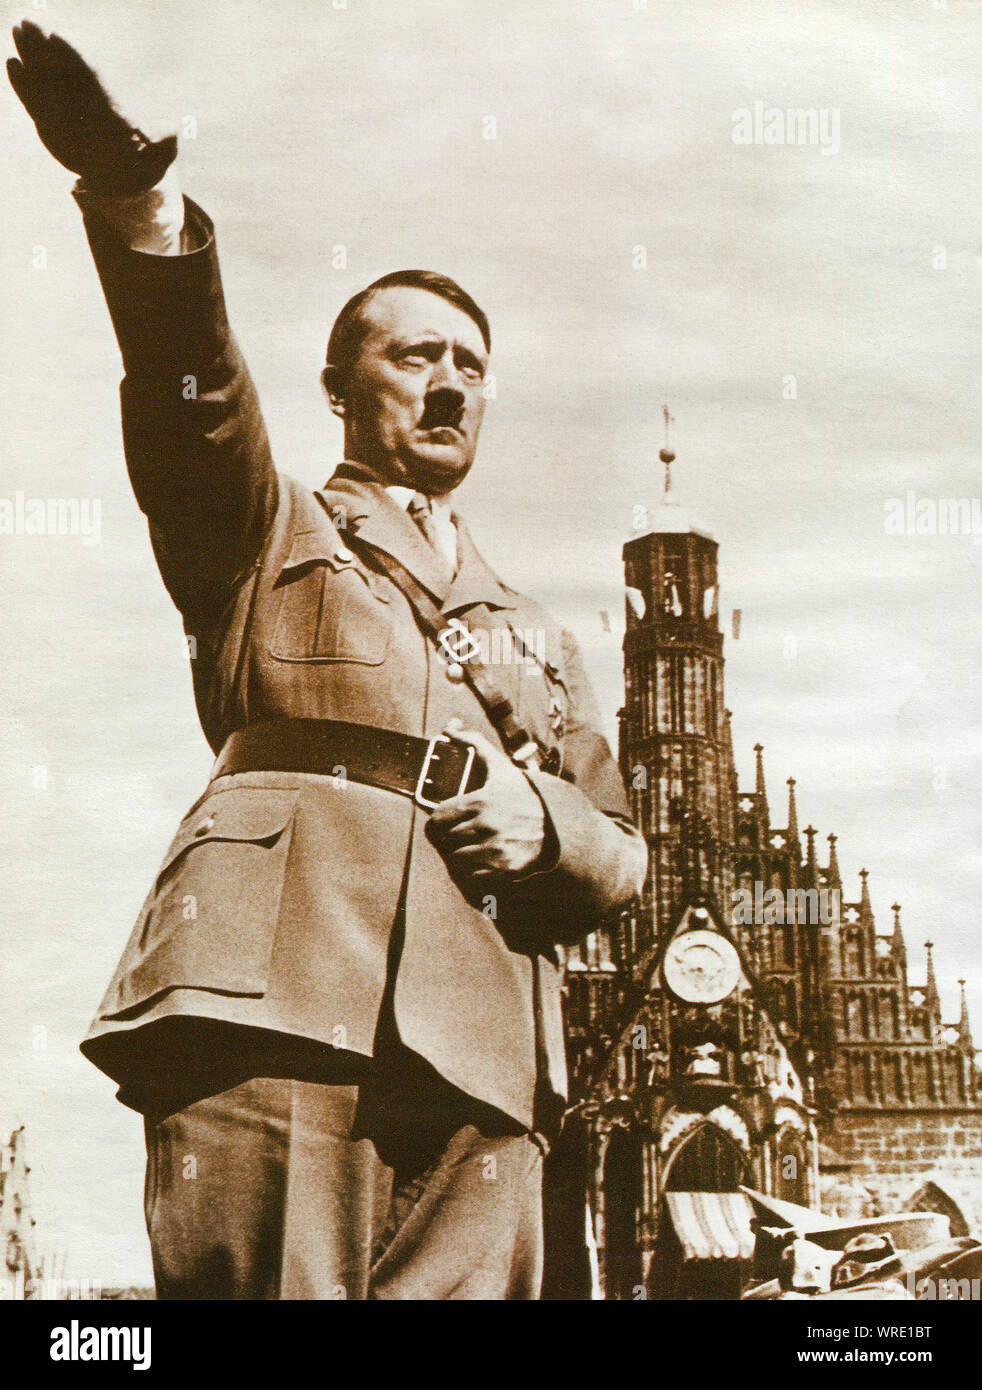 GERMANY, CIRCA 1945: Adolf Hitler saluting in Berlin in 1945 - one of his last photographs Stock Photo